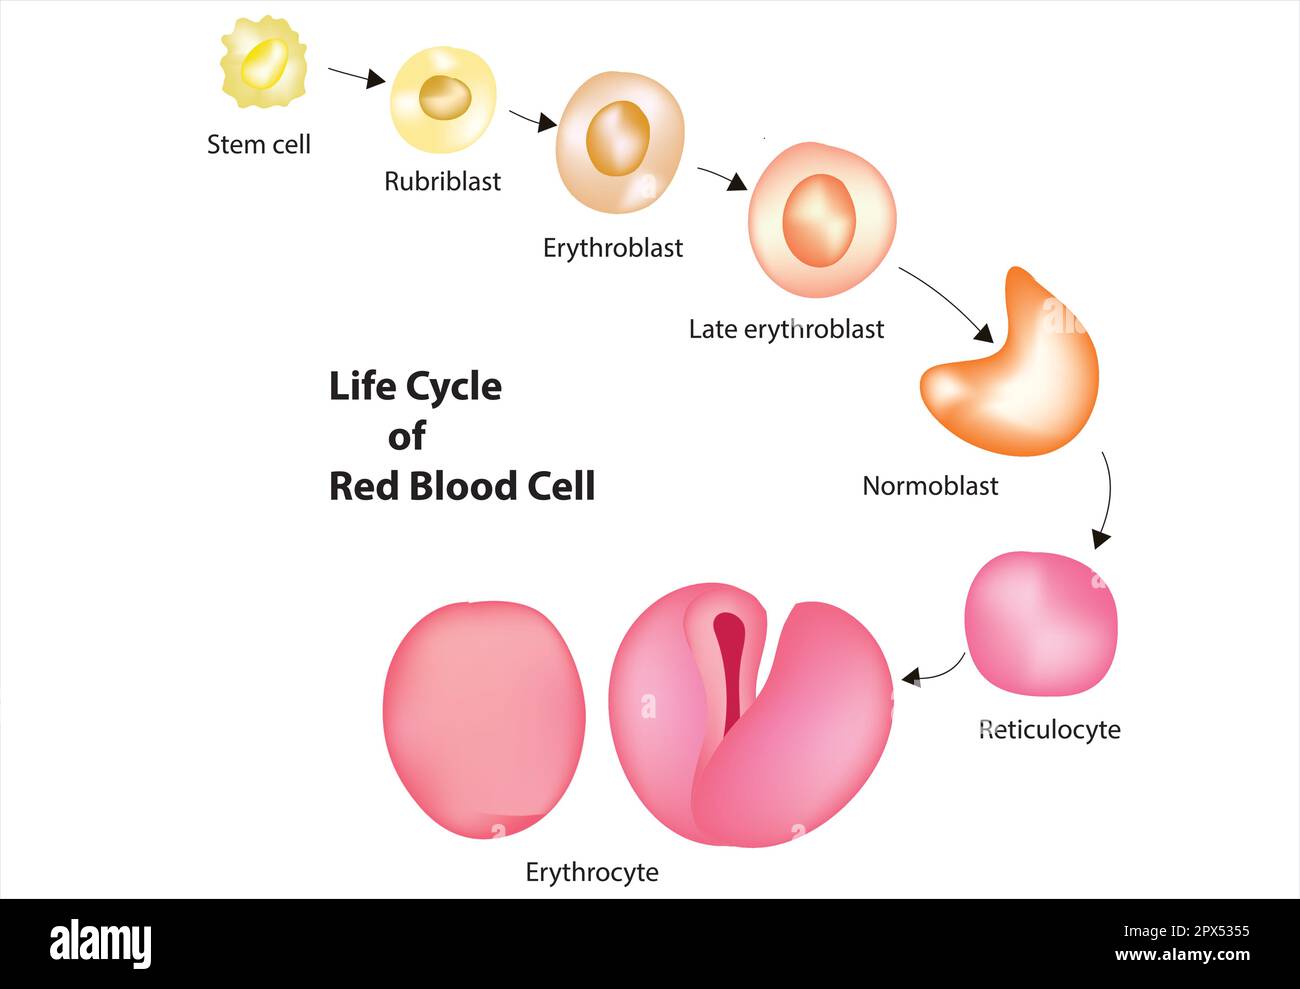 Life Cycle Of Red Blood Cells Diagram